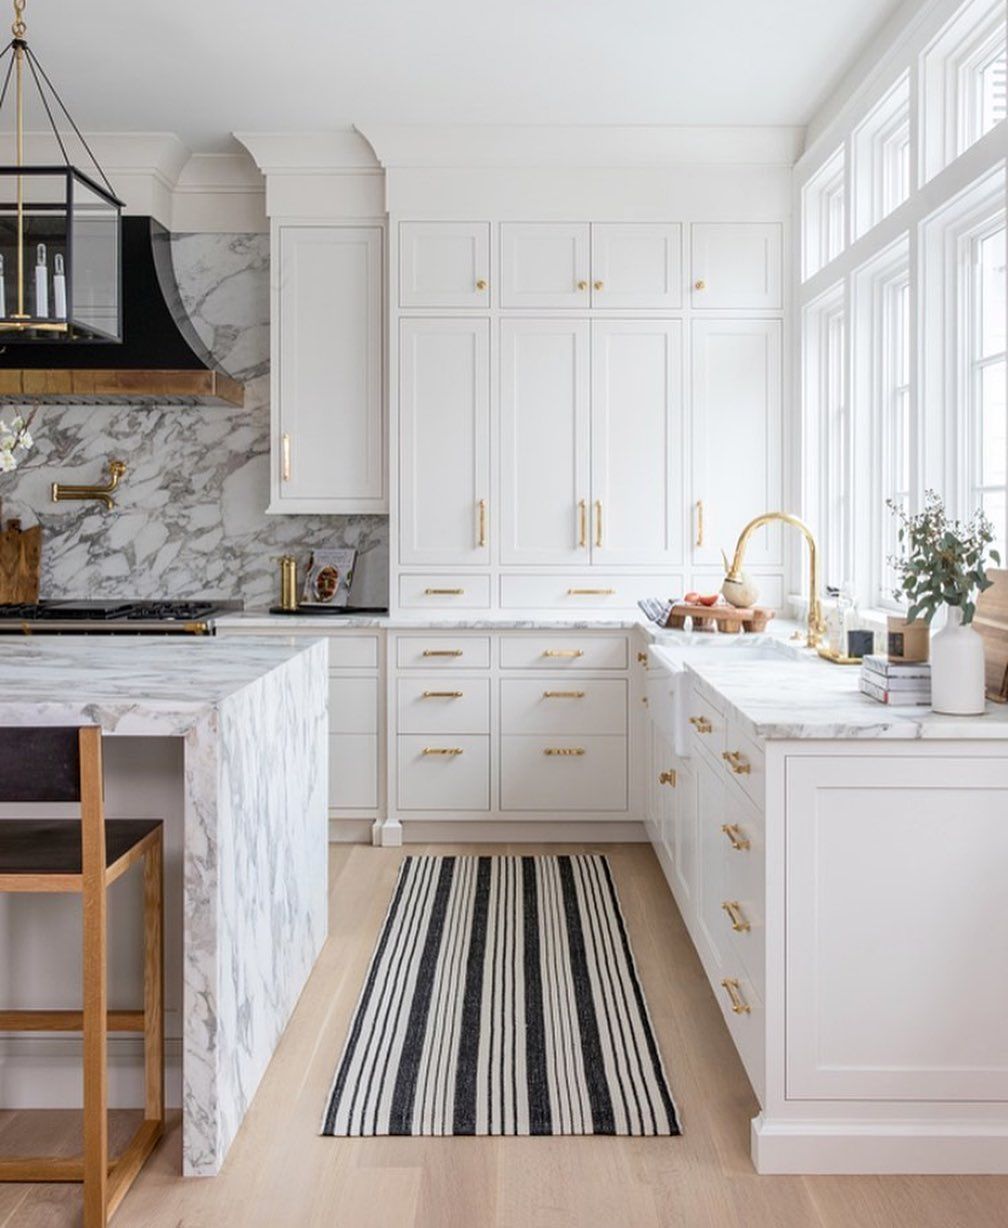 scoutandnimble's Instagram profile post: “Lovely details in this kitchen by  @the_brothers_stonington & … | Kitchen interior, Interior design kitchen,  Home kitchens